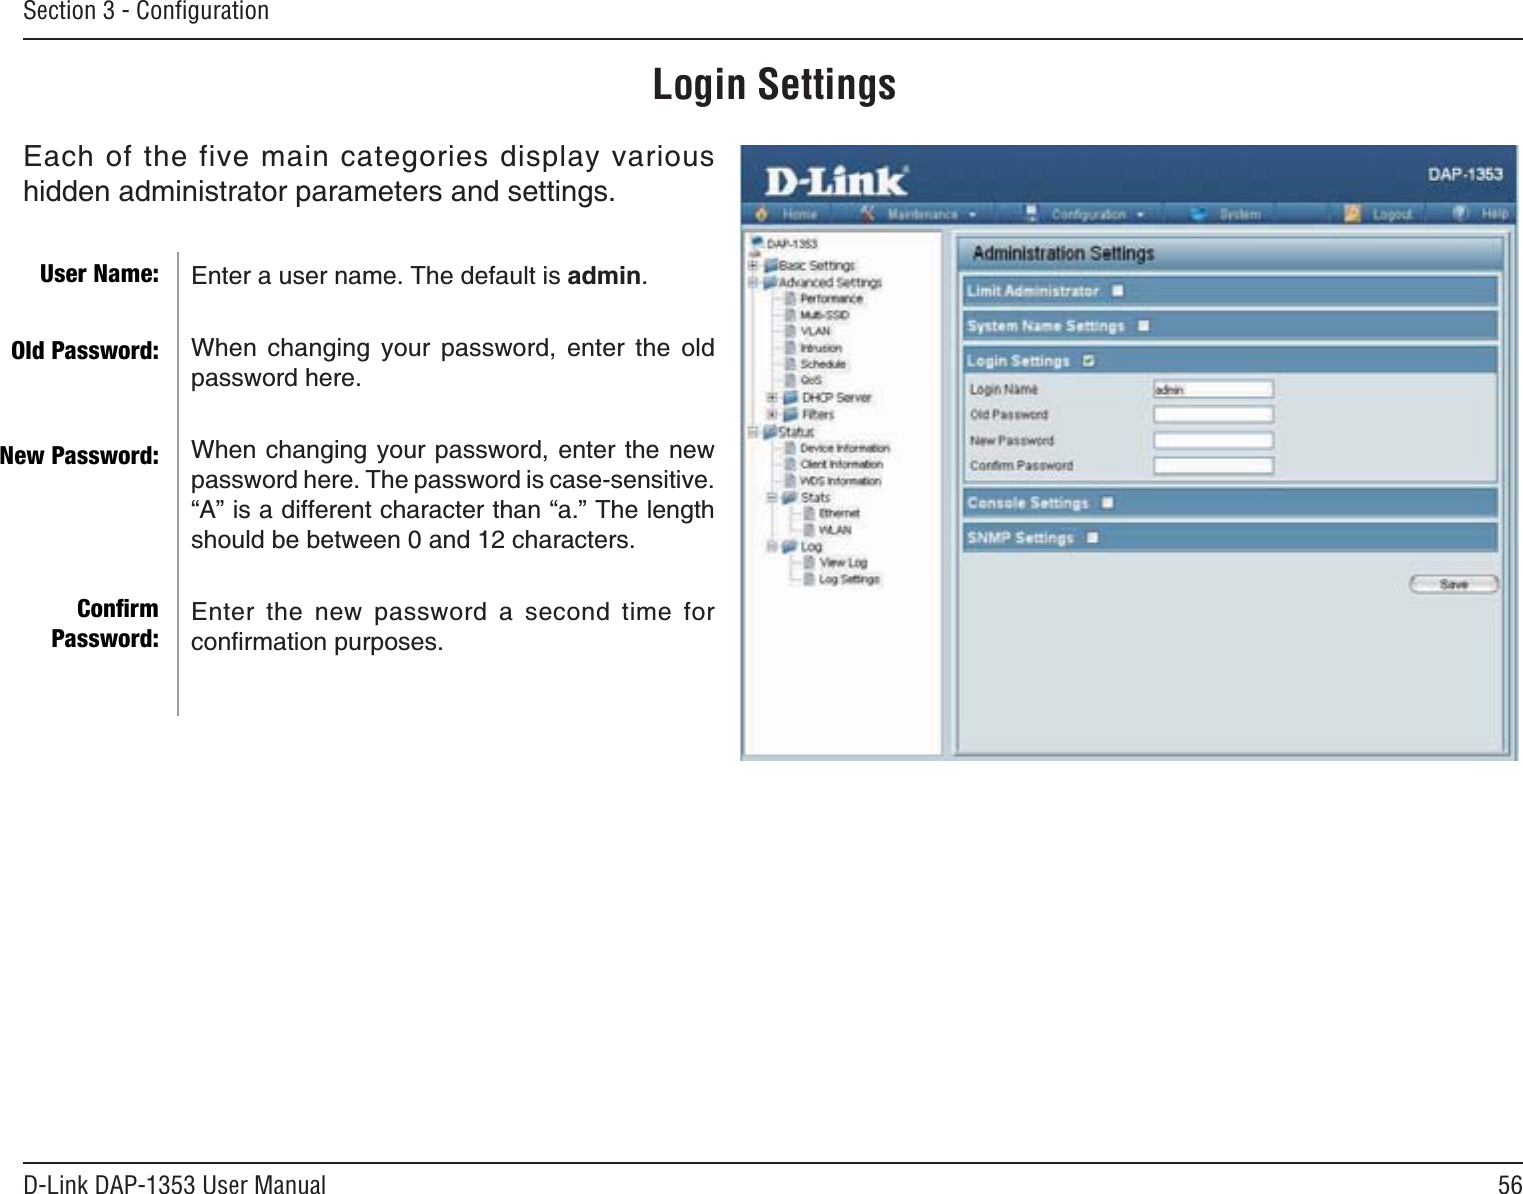 56D-Link DAP-1353 User ManualSection 3 - ConﬁgurationLogin SettingsEach of the five main categories display various hidden administrator parameters and settings.Enter a user name. The default is admin.When changing your password, enter the old password here.When changing your password, enter the new password here. The password is case-sensitive. ő#ŒKUCFKHHGTGPVEJCTCEVGTVJCPőCŒ6JGNGPIVJUJQWNFDGDGVYGGPCPFEJCTCEVGTUEnter the new password a second time for EQPſTOCVKQPRWTRQUGUUser Name:Old Password:New Password:ConﬁrmPassword: